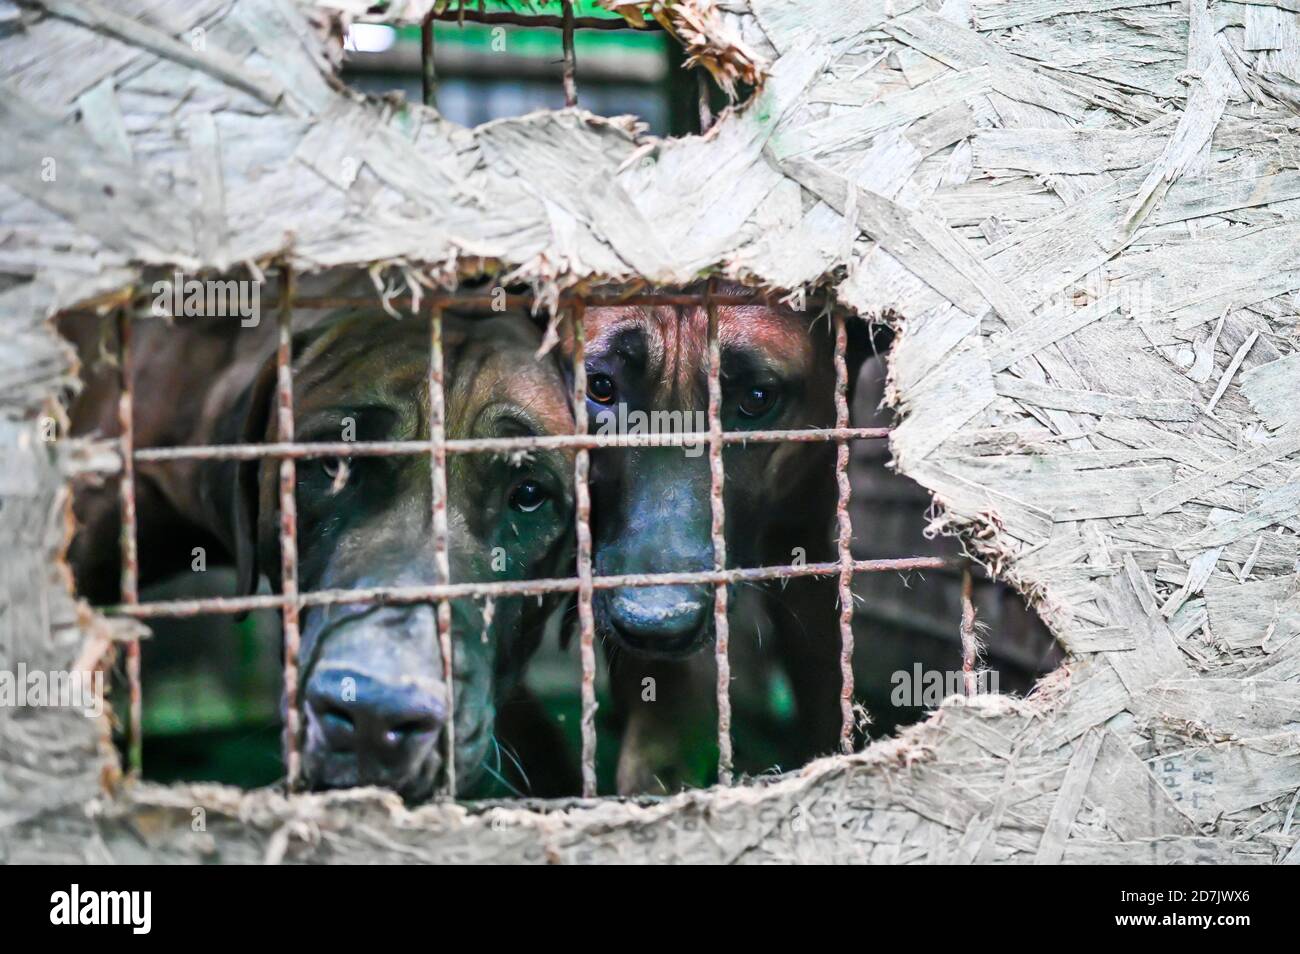 Haemi, South Korea. 22nd Oct, 2020. Dogs look through a hole in plywood covering a cage at a dog meat farm in Haemi, South Korea on Thursday, October 22, 2020. Photo by Thomas Maresca/UPI Credit: UPI/Alamy Live News Stock Photo